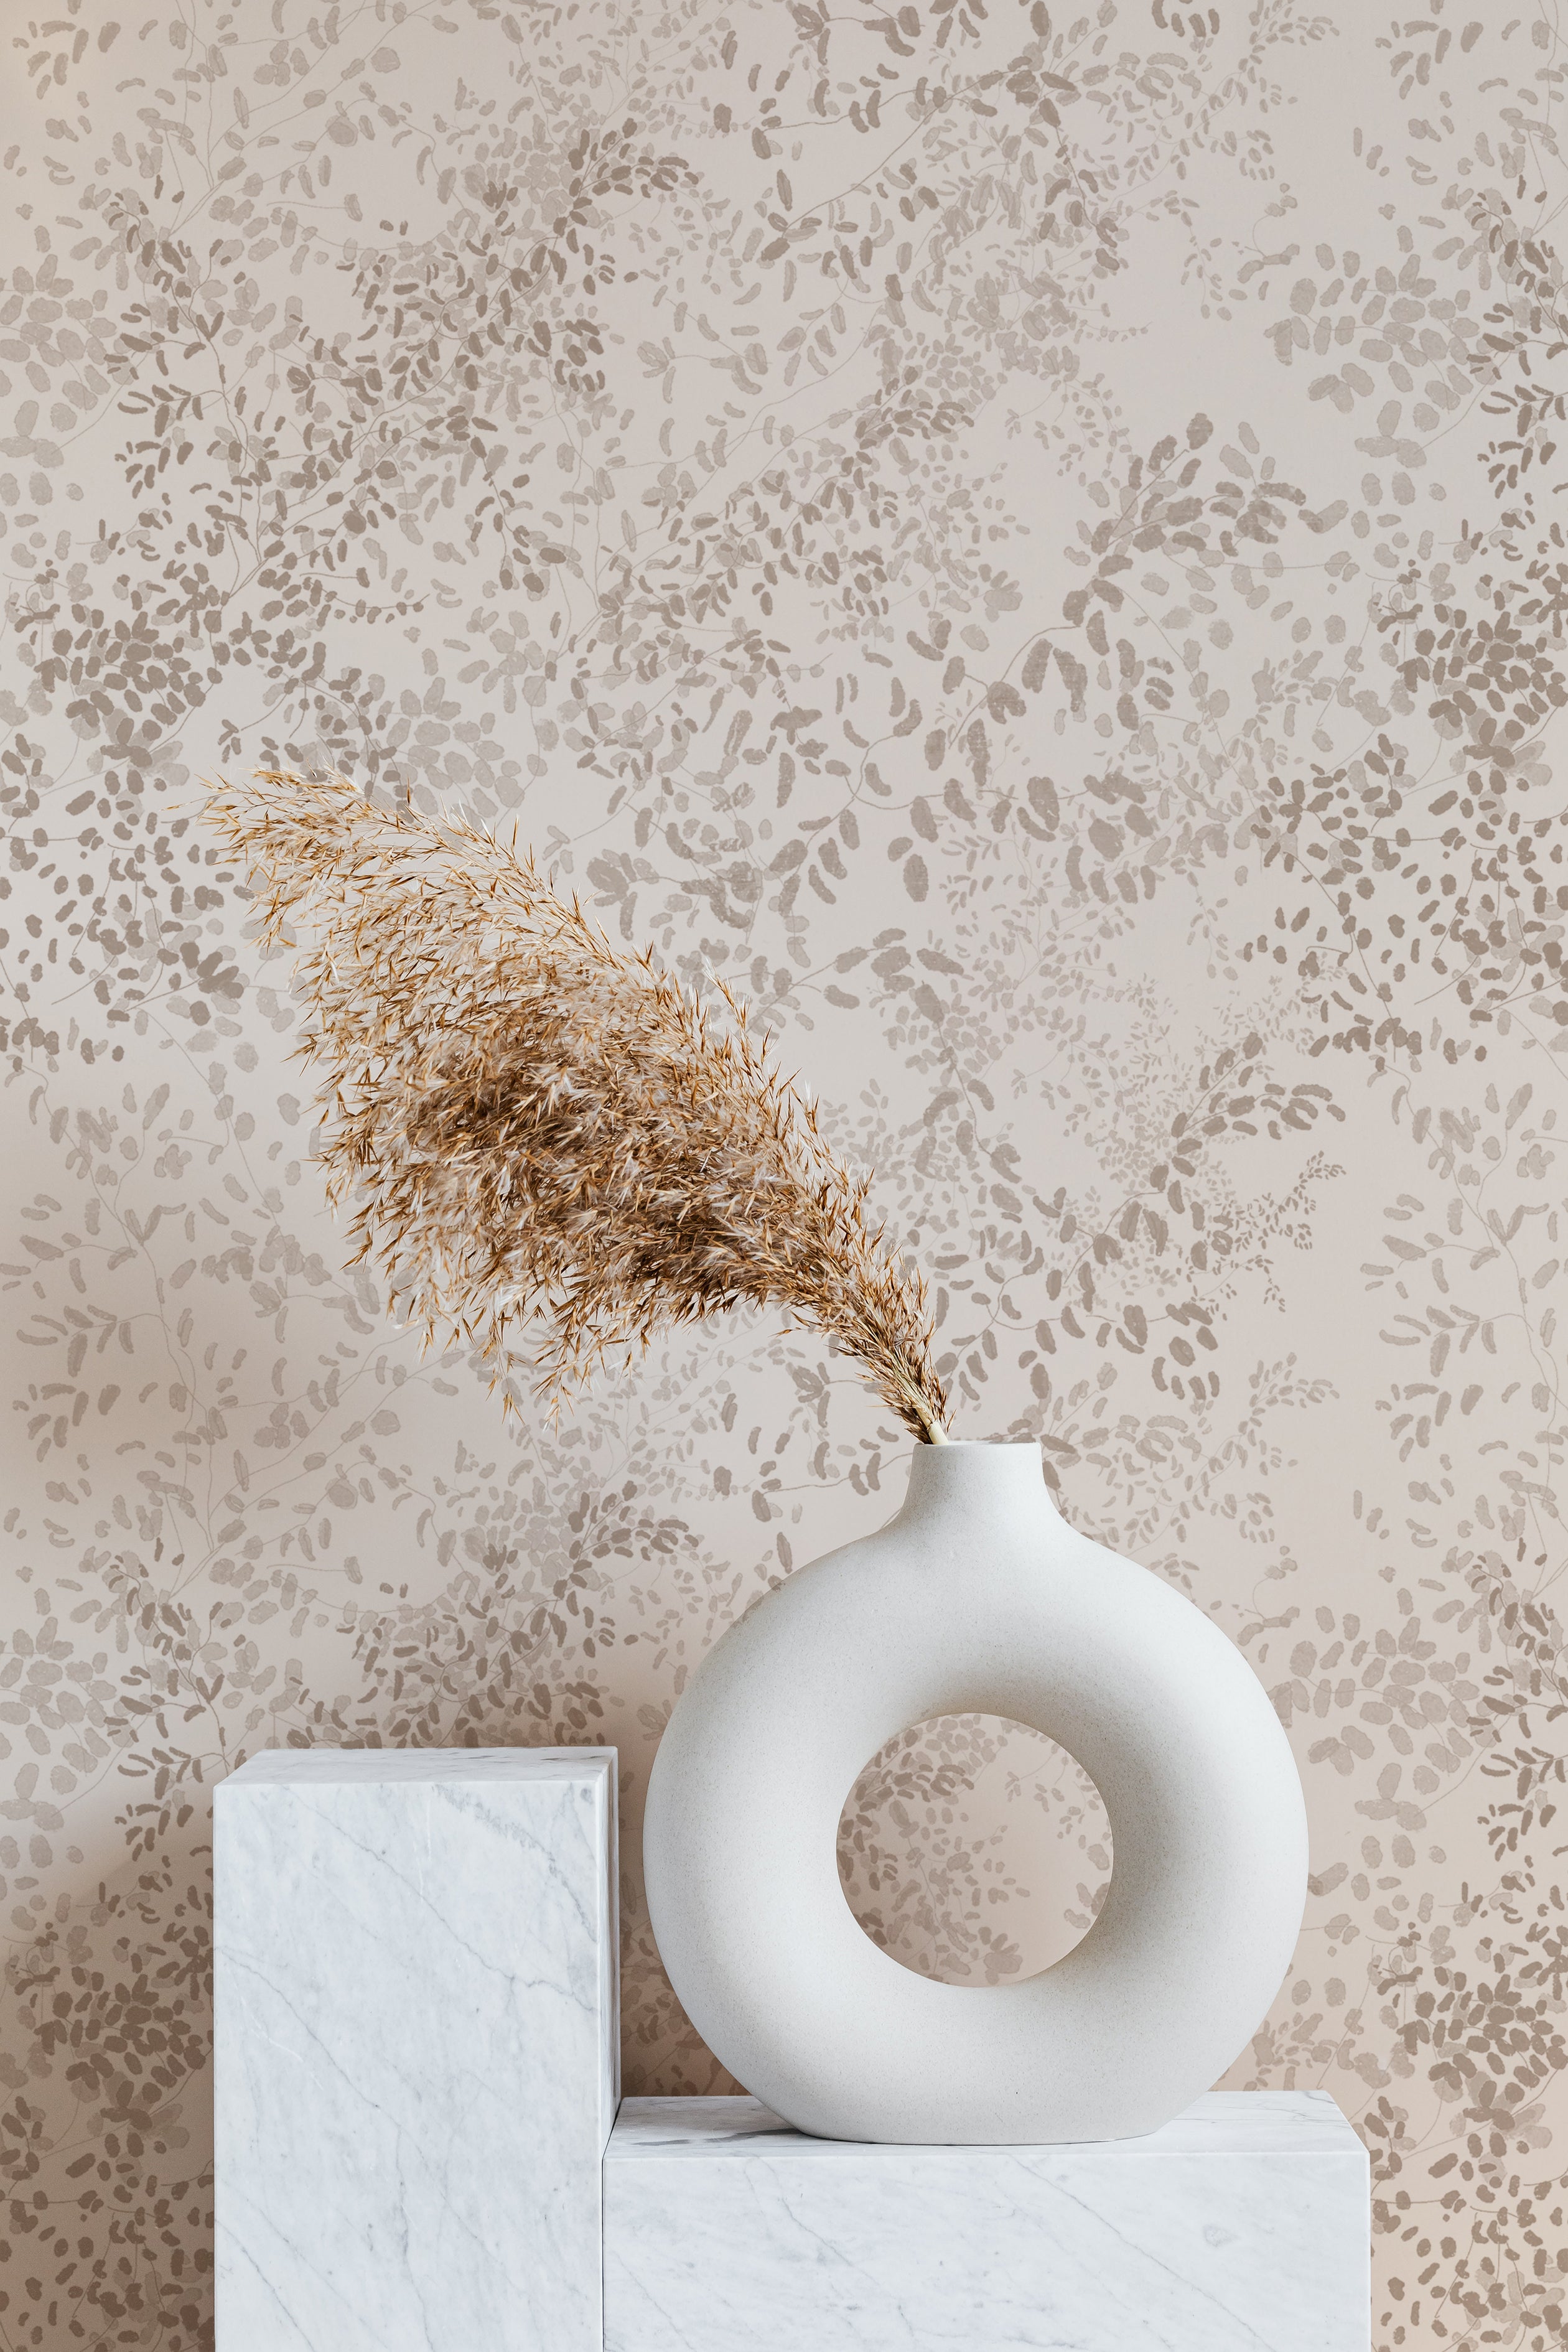 A modern interior setting featuring the Golden Delicate Winter Floral wallpaper as a backdrop with a white vase holding golden dried grass on a marble and white pedestal, blending effortlessly with the subtle floral design.